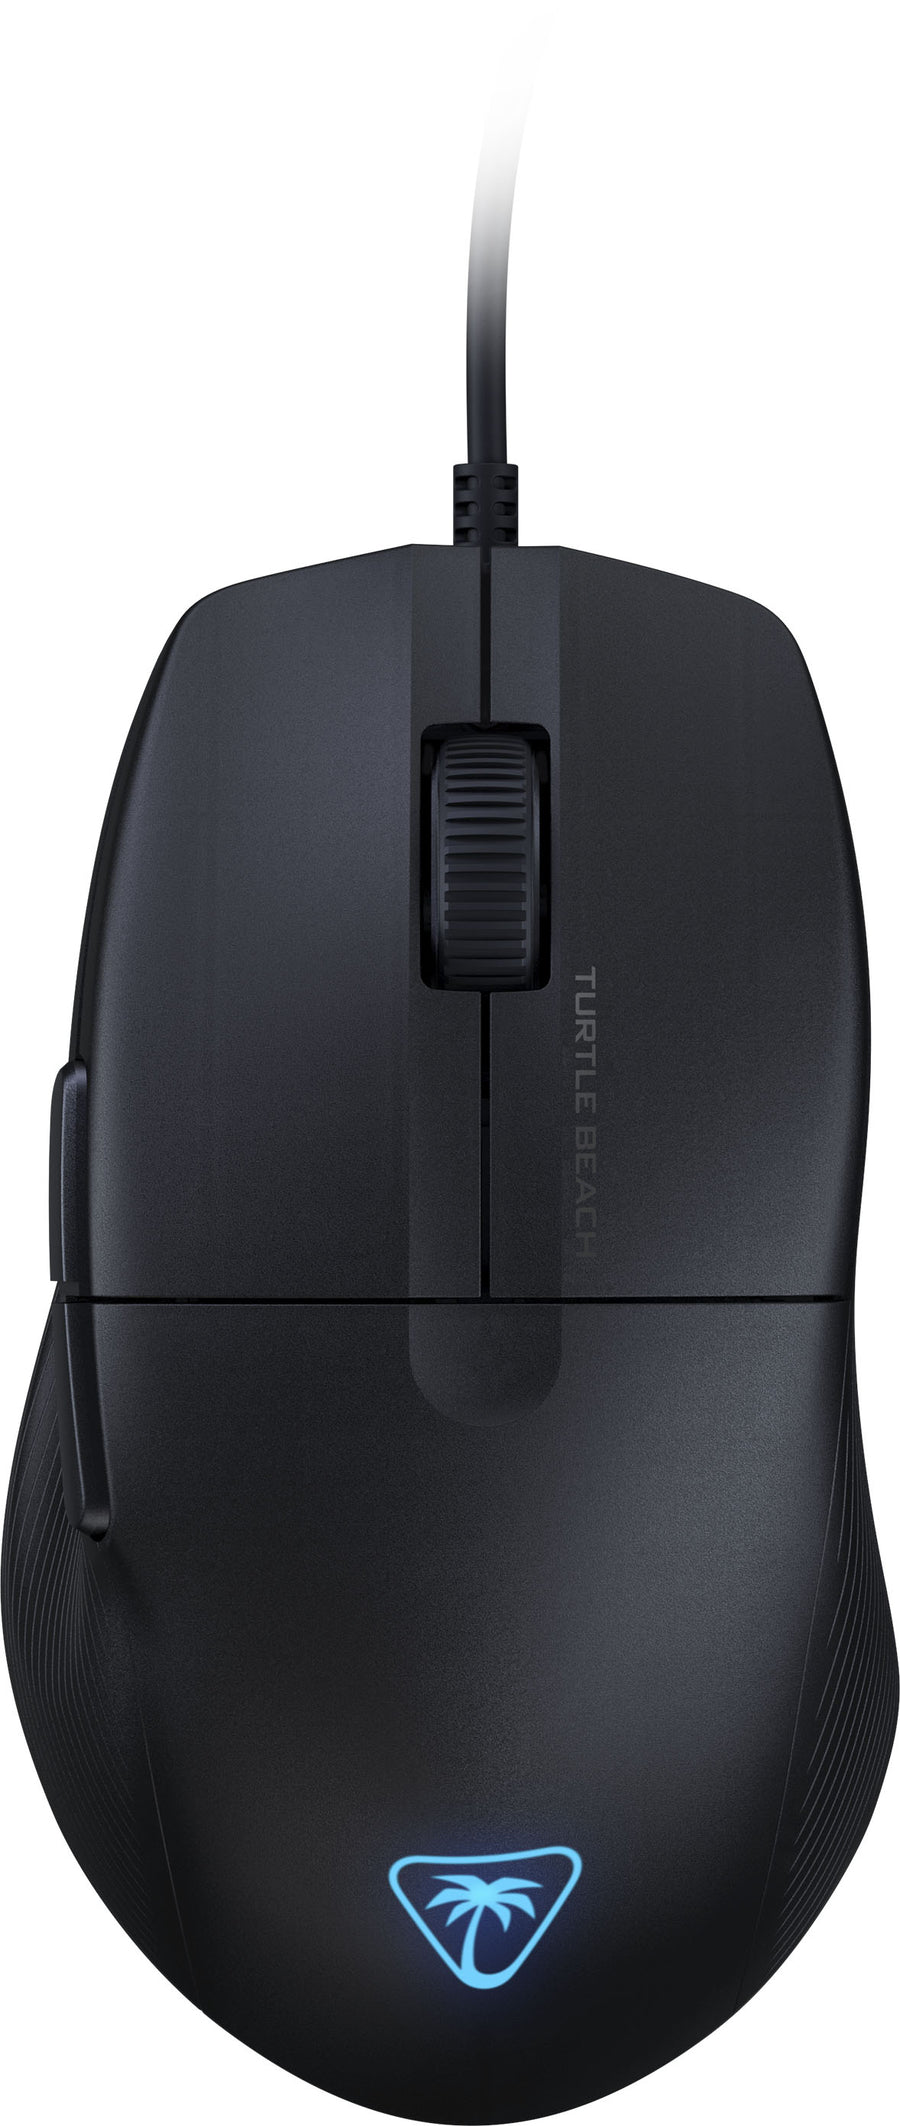 Turtle Beach - Pure SEL Ultra-Light Wired Ergonomic RGB Gaming Mouse with 8K DPI Optical Sensor & Mechanical Switches - Black_0